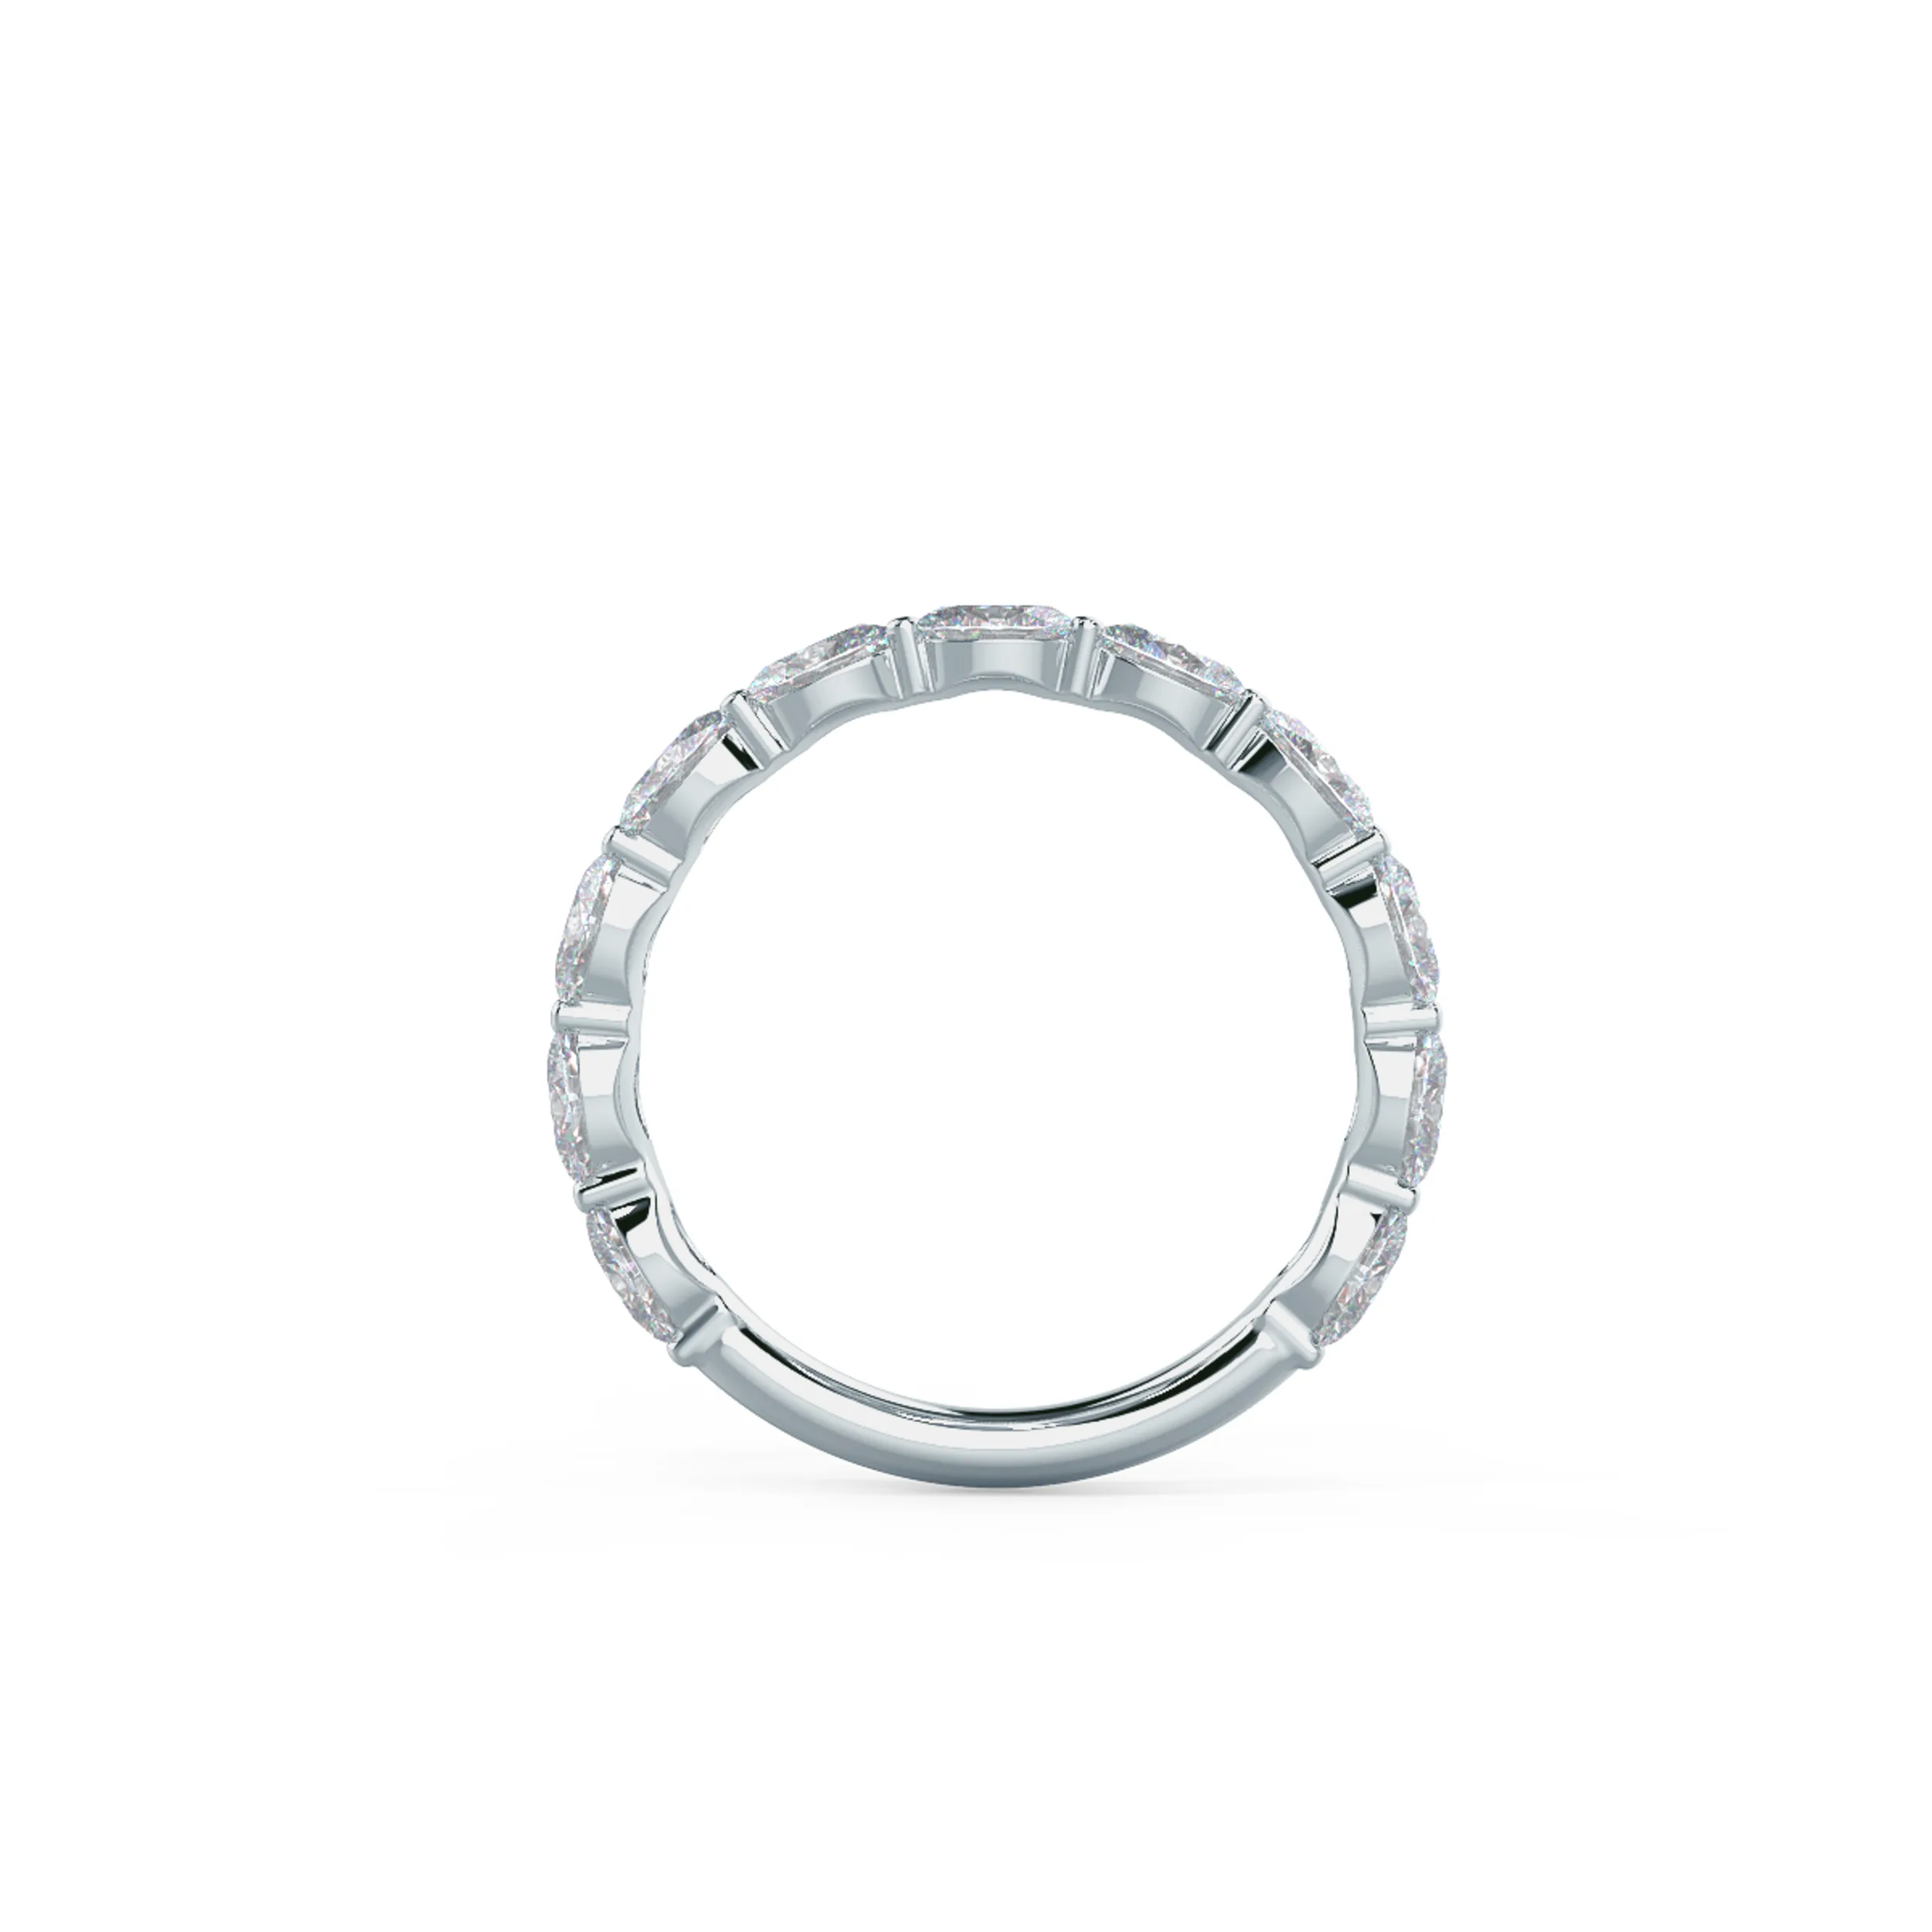 18k White Gold Oval East-West Three Quarter Band featuring 1.65 Carat Lab Diamonds (Profile View)